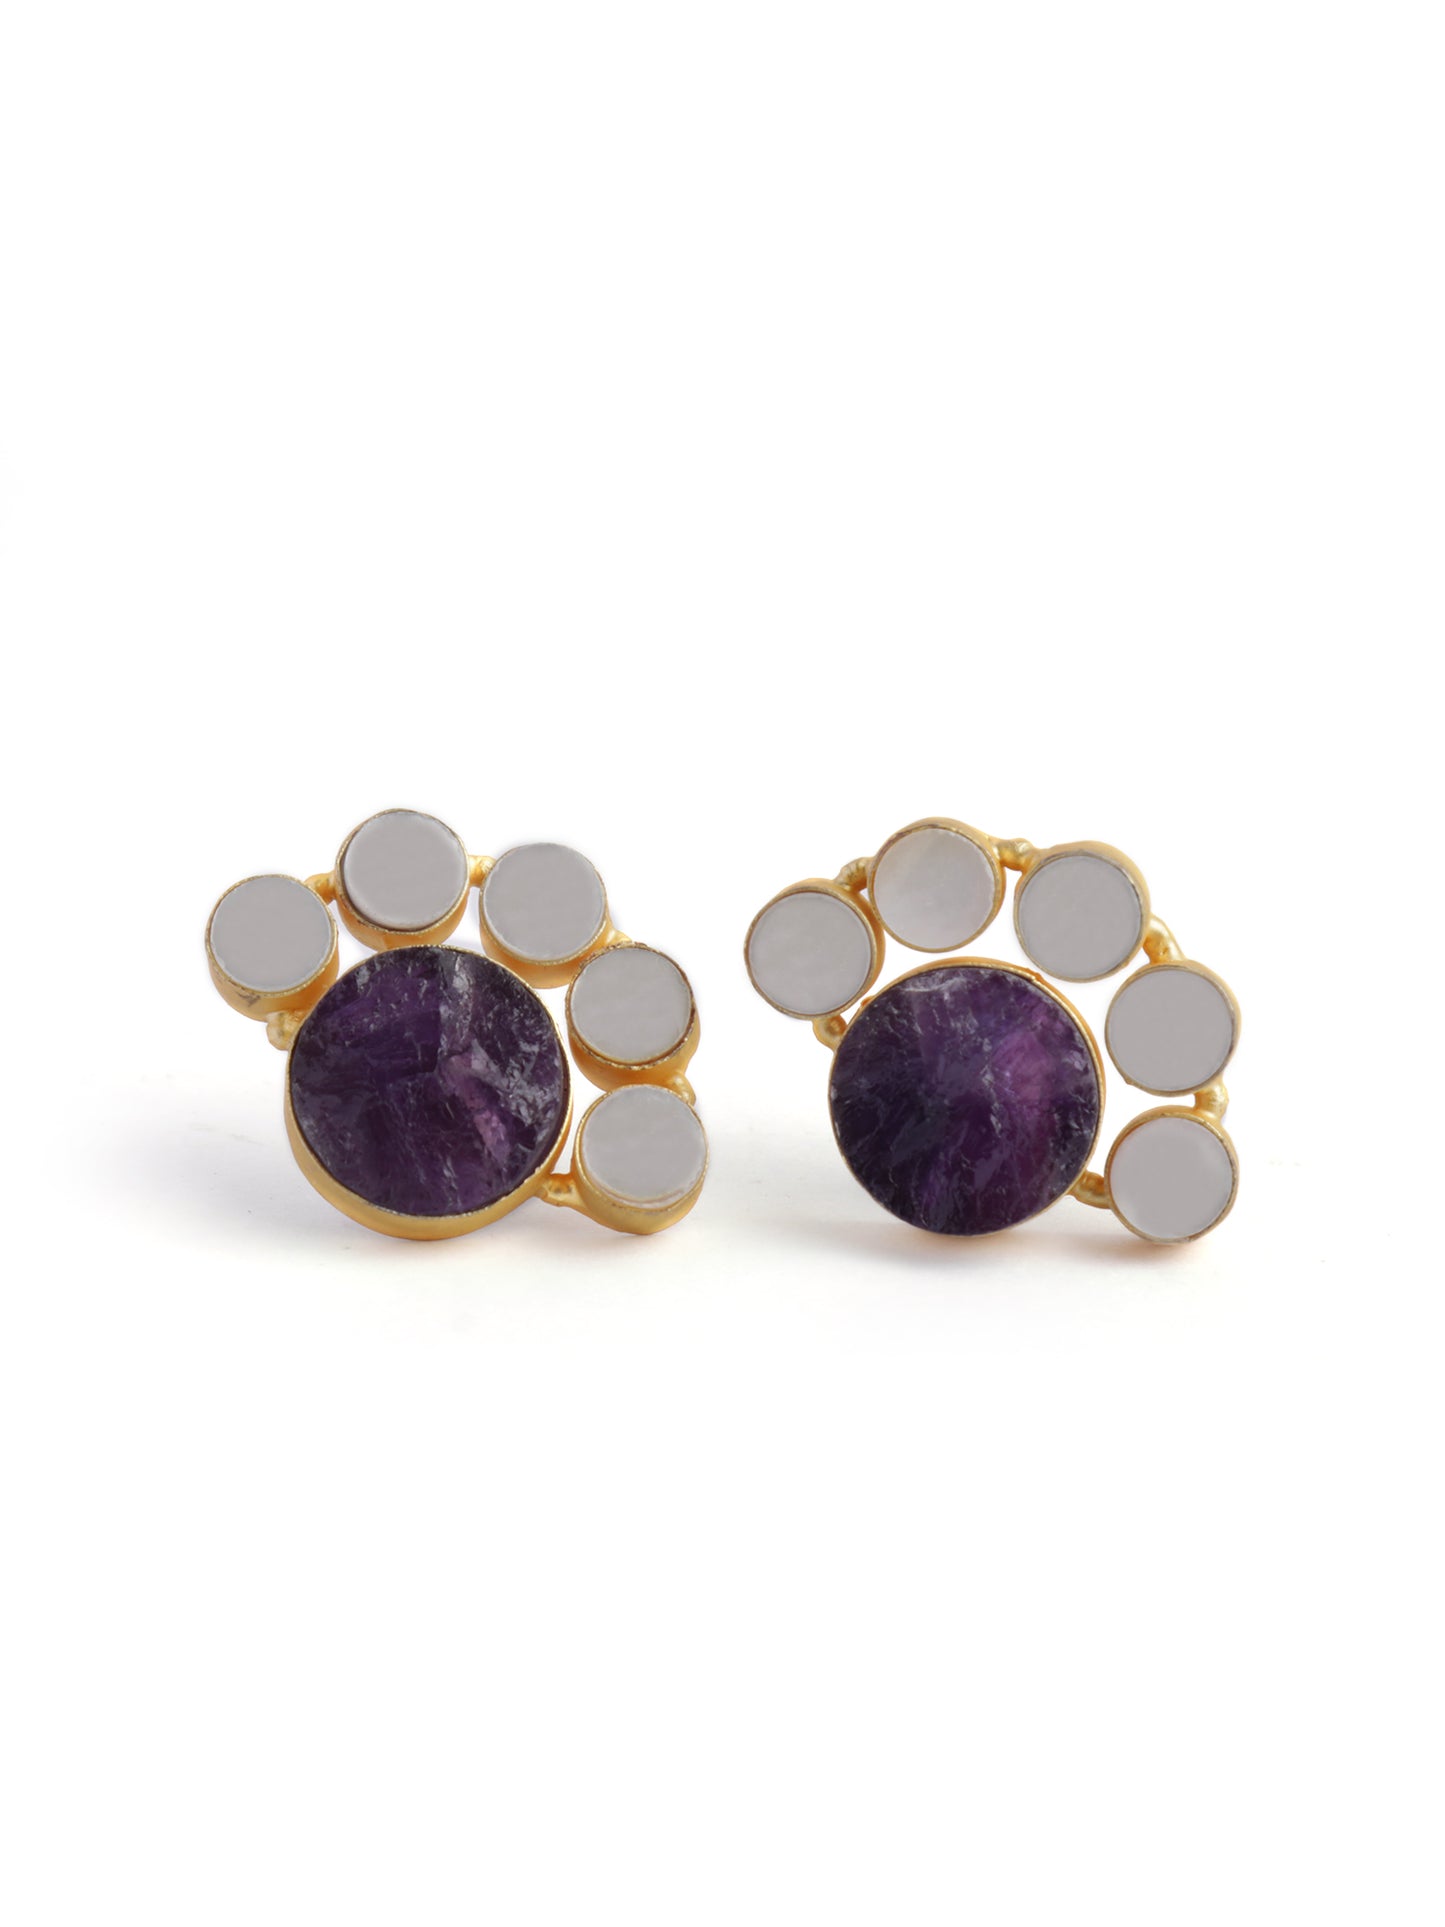 The Exquisite Solis Earrings